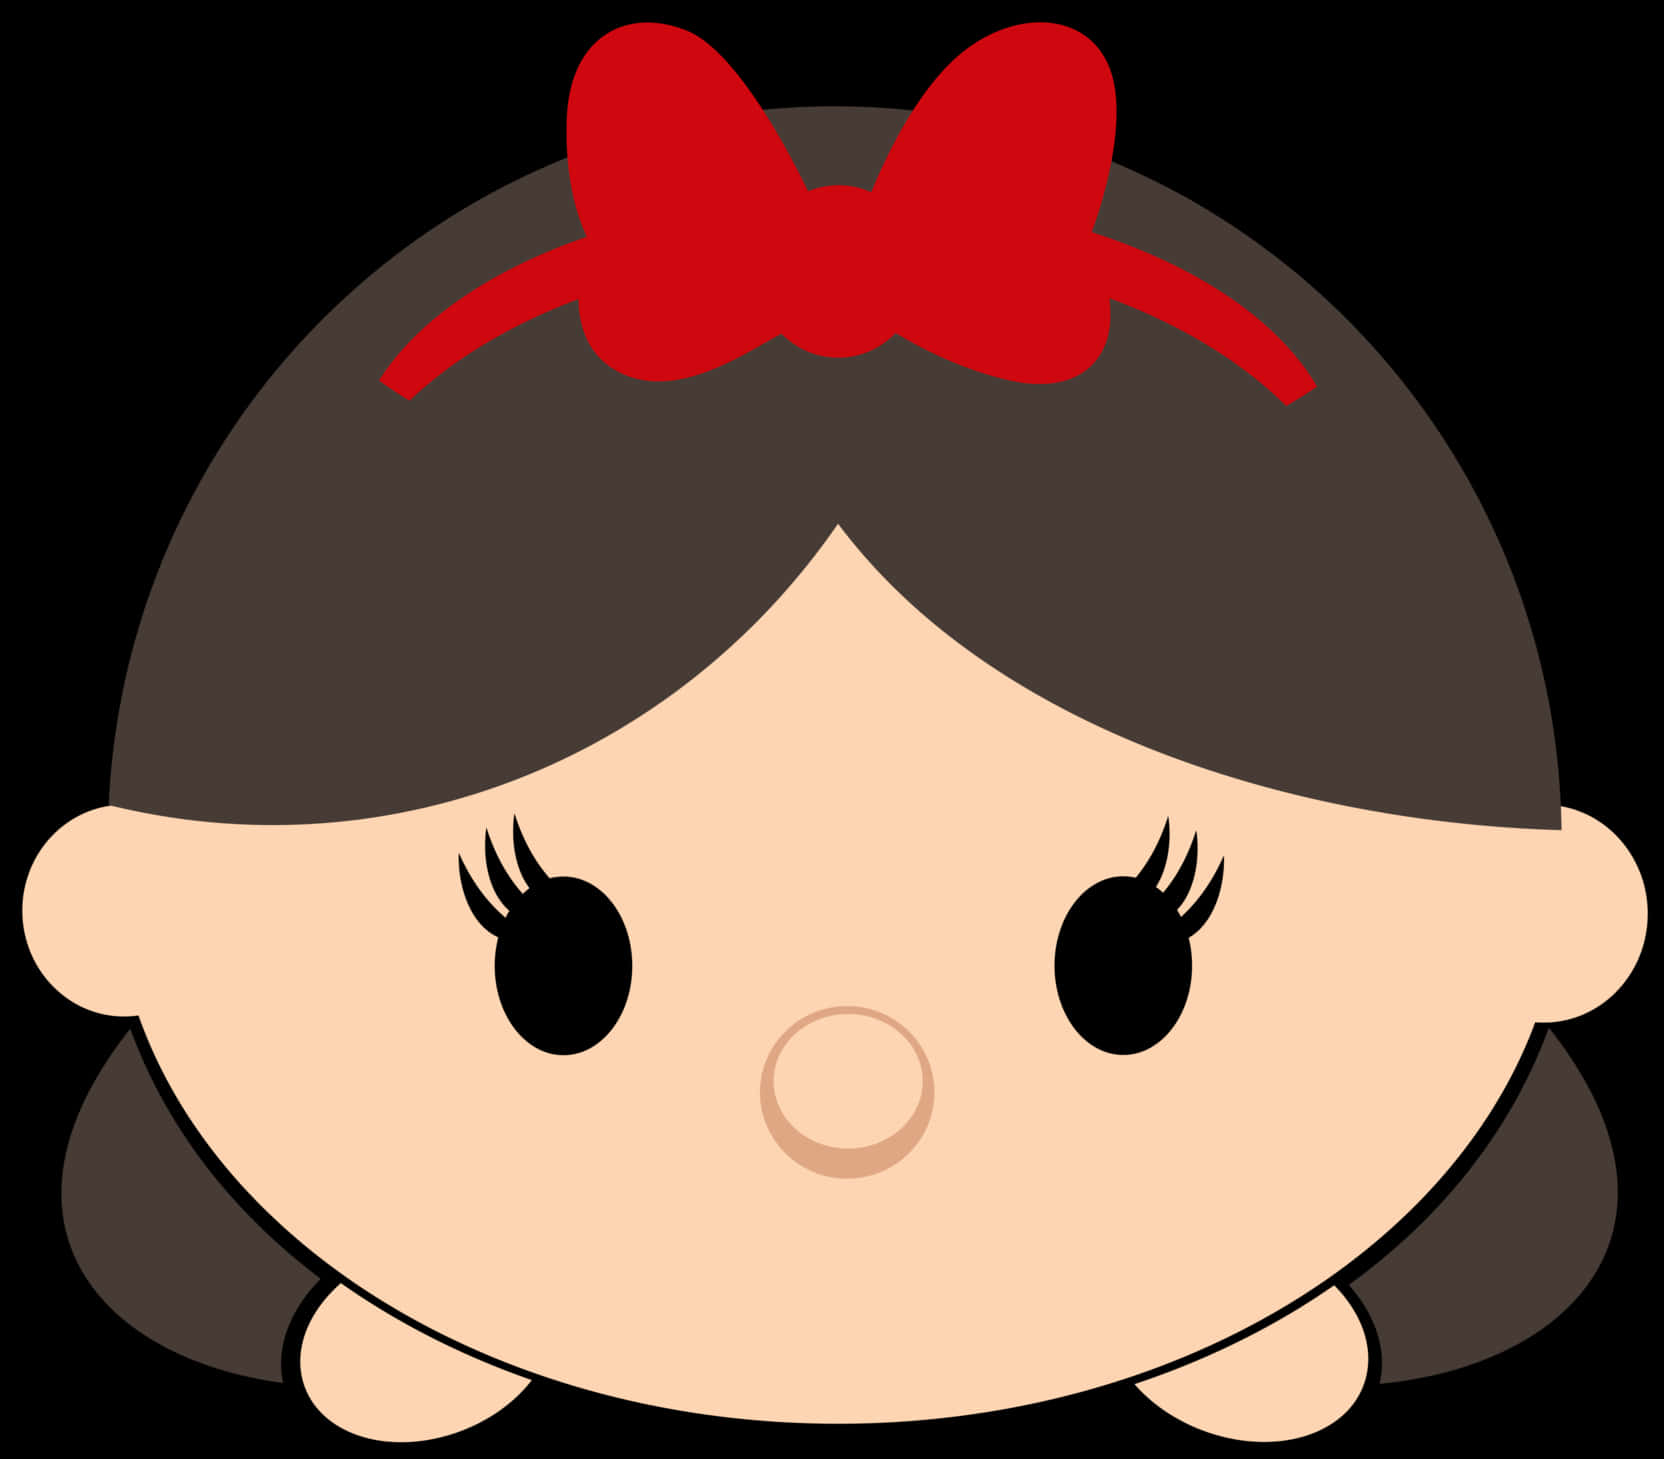 A Cartoon Of A Girl With A Red Bow